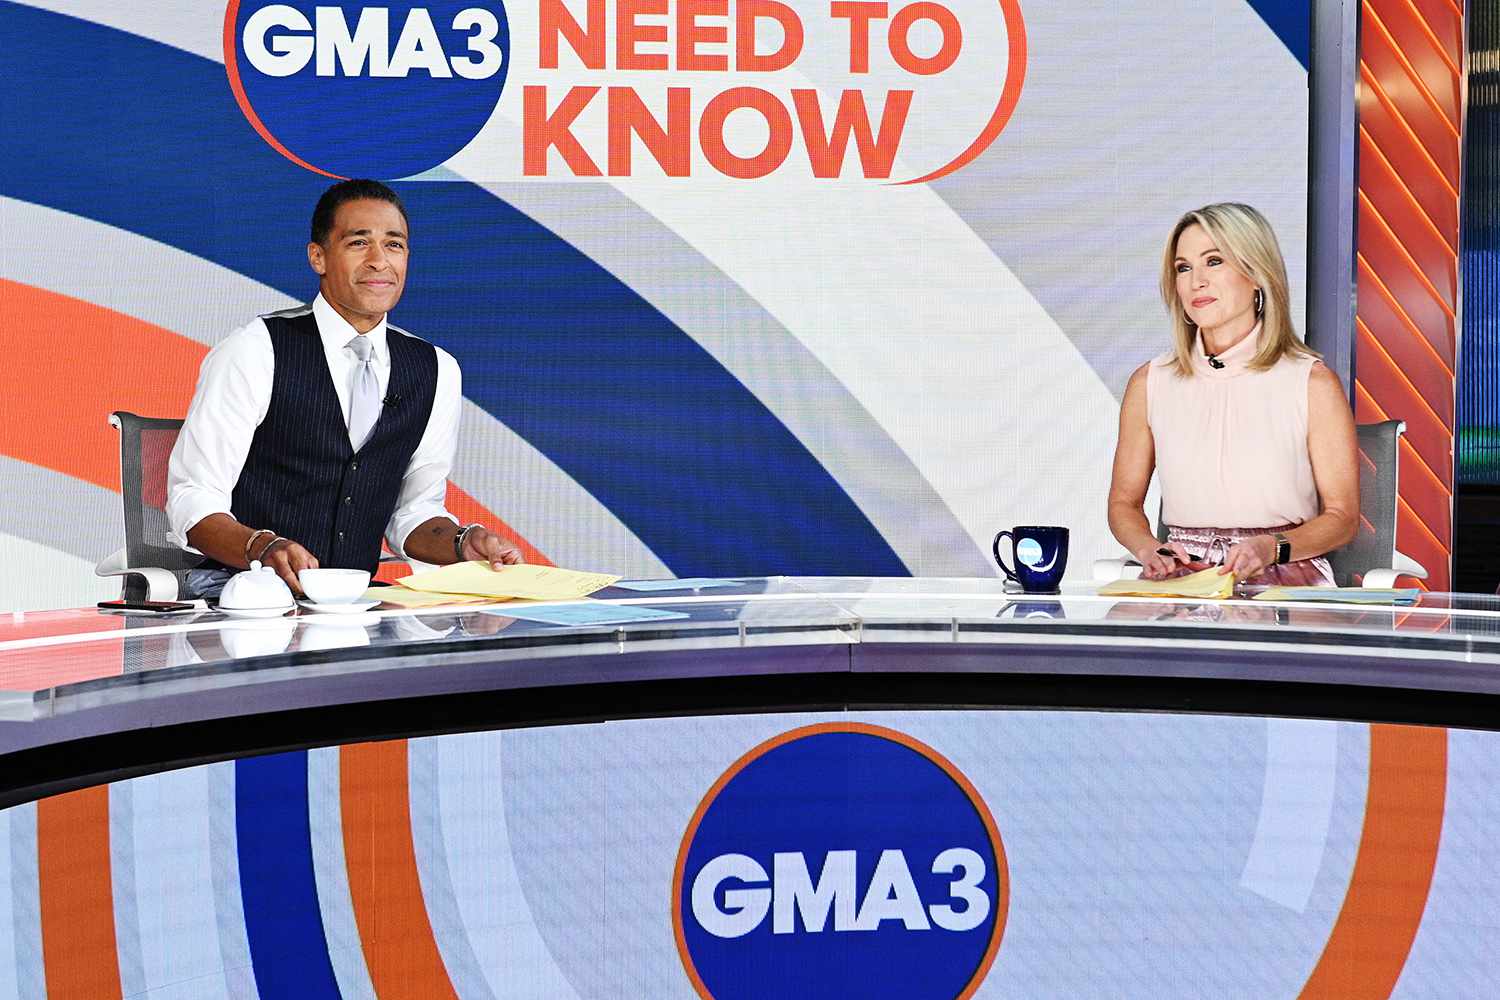 GMA3: WHAT YOU NEED TO KNOW - 10/5/21 - Show coverage of GMA3: What You Need to Know on Tuesday, October 5, 2021. (Photo by Paula Lobo/ABC via Getty Images) TJ HOLMES, AMY ROBACH